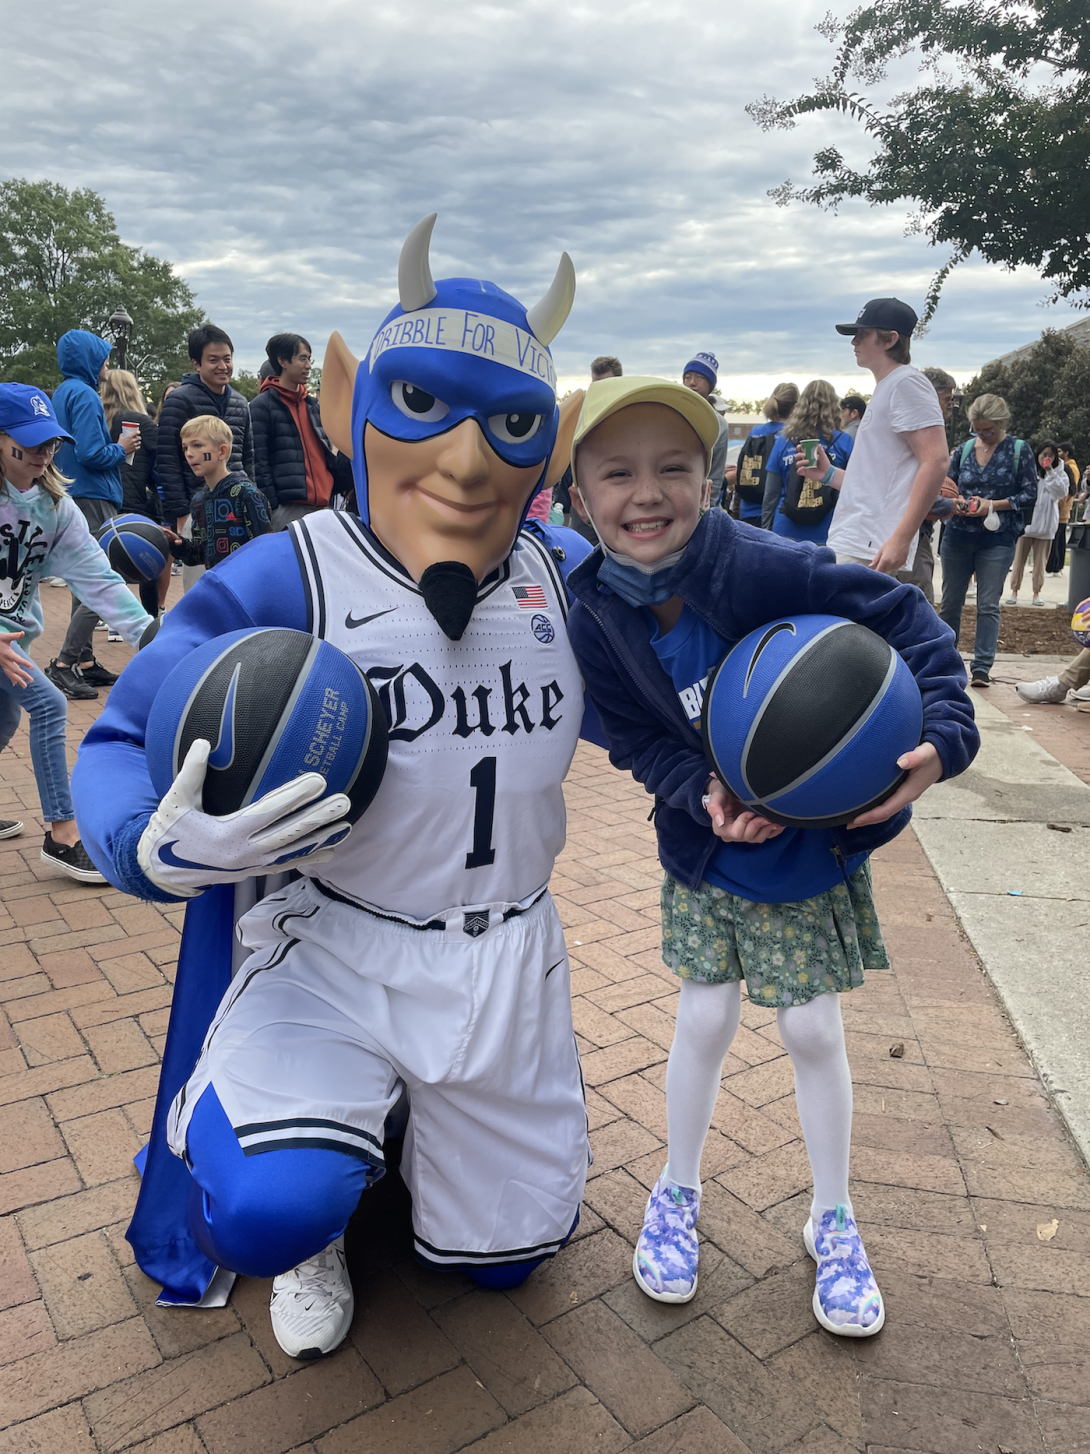 Blue Devil Mascot holding a basketball kneels next to small girl holding a basketball outdoors with several people in the background